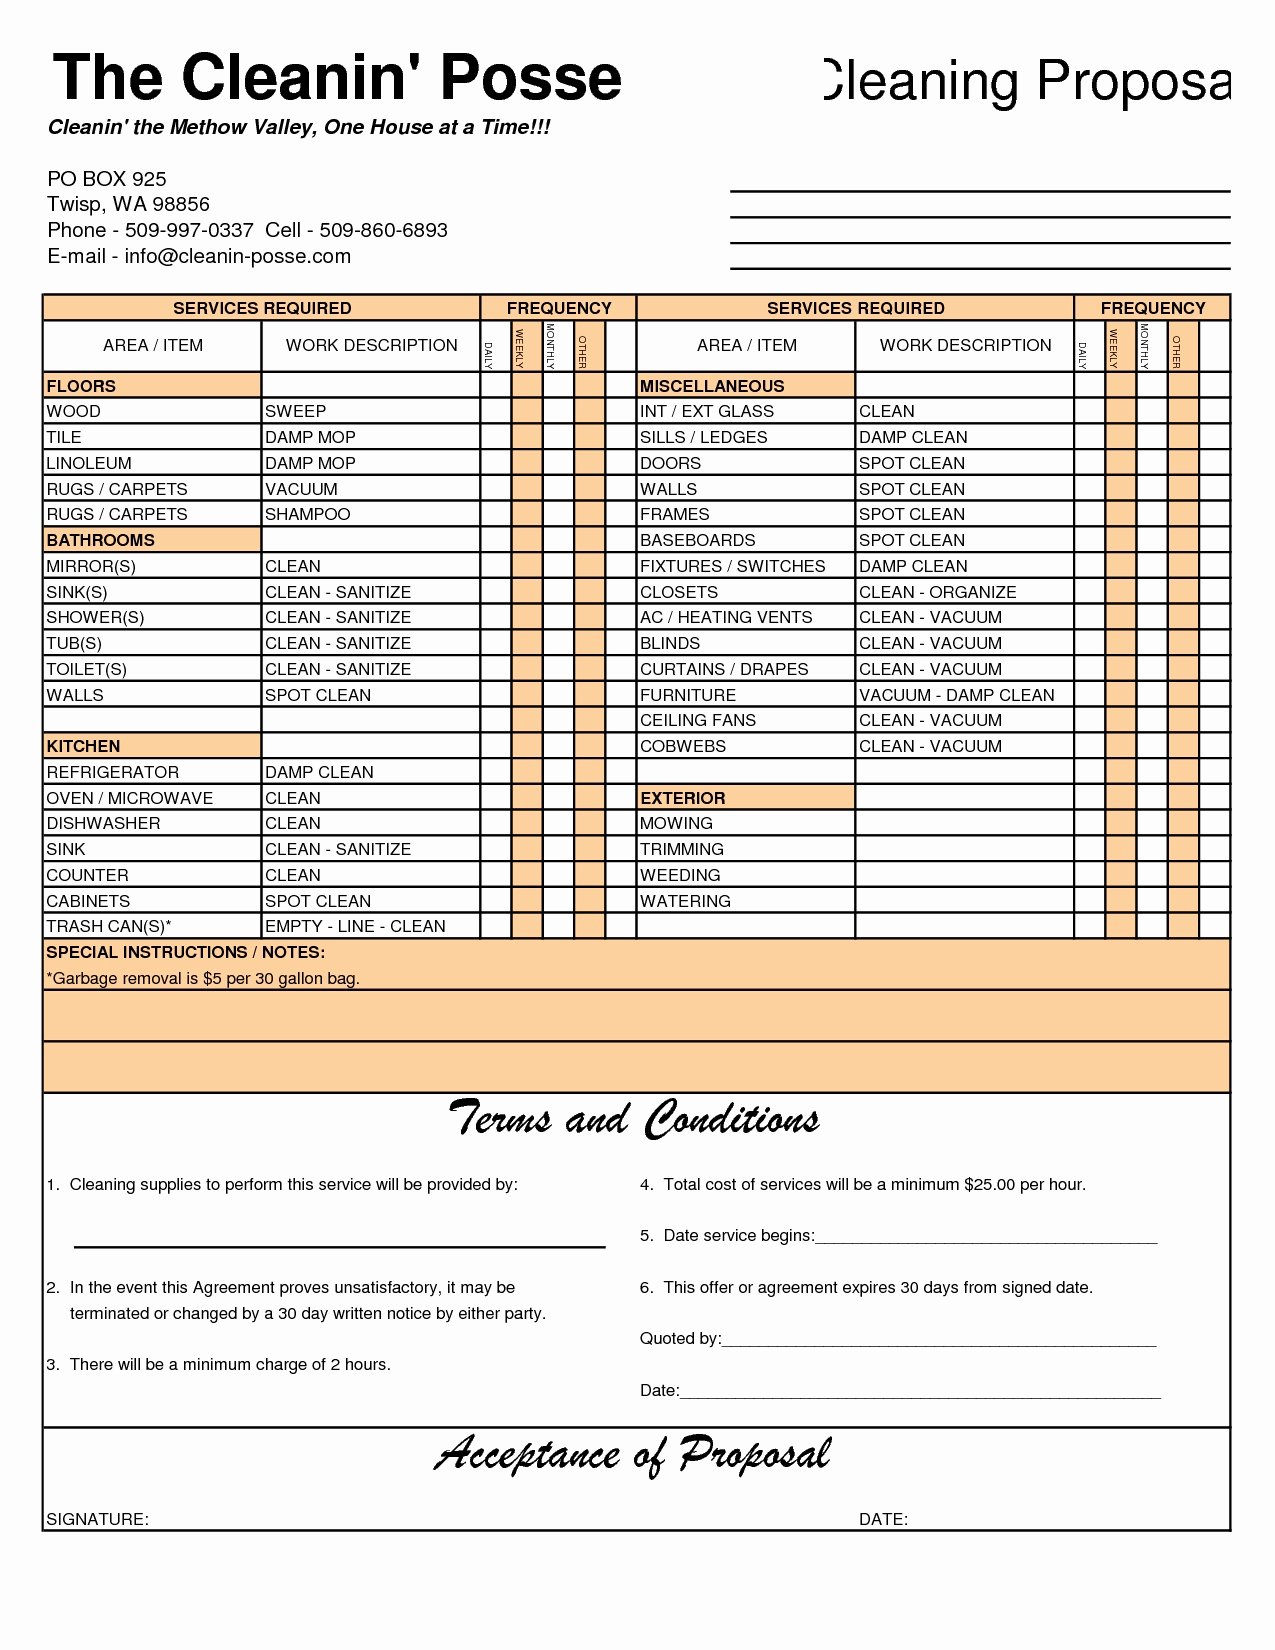 Invoice Template for Cleaning Services Best Of Cleaning Services Invoice Sample Invoice Template Ideas